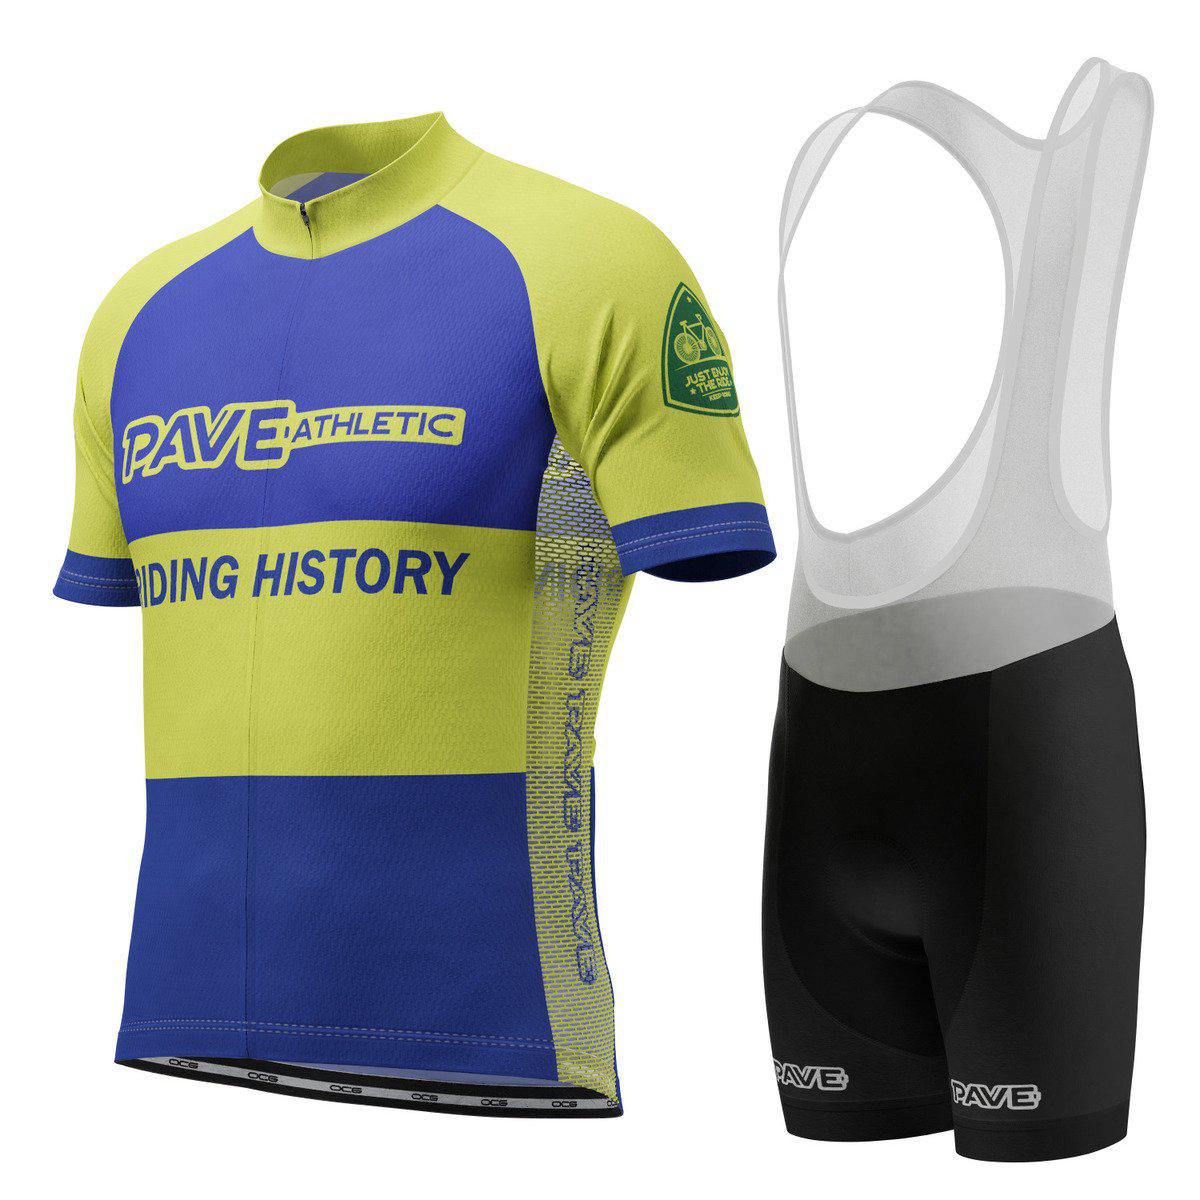 PAVE Athletic Retro Rubber Road Short Sleeve Cycling Kit